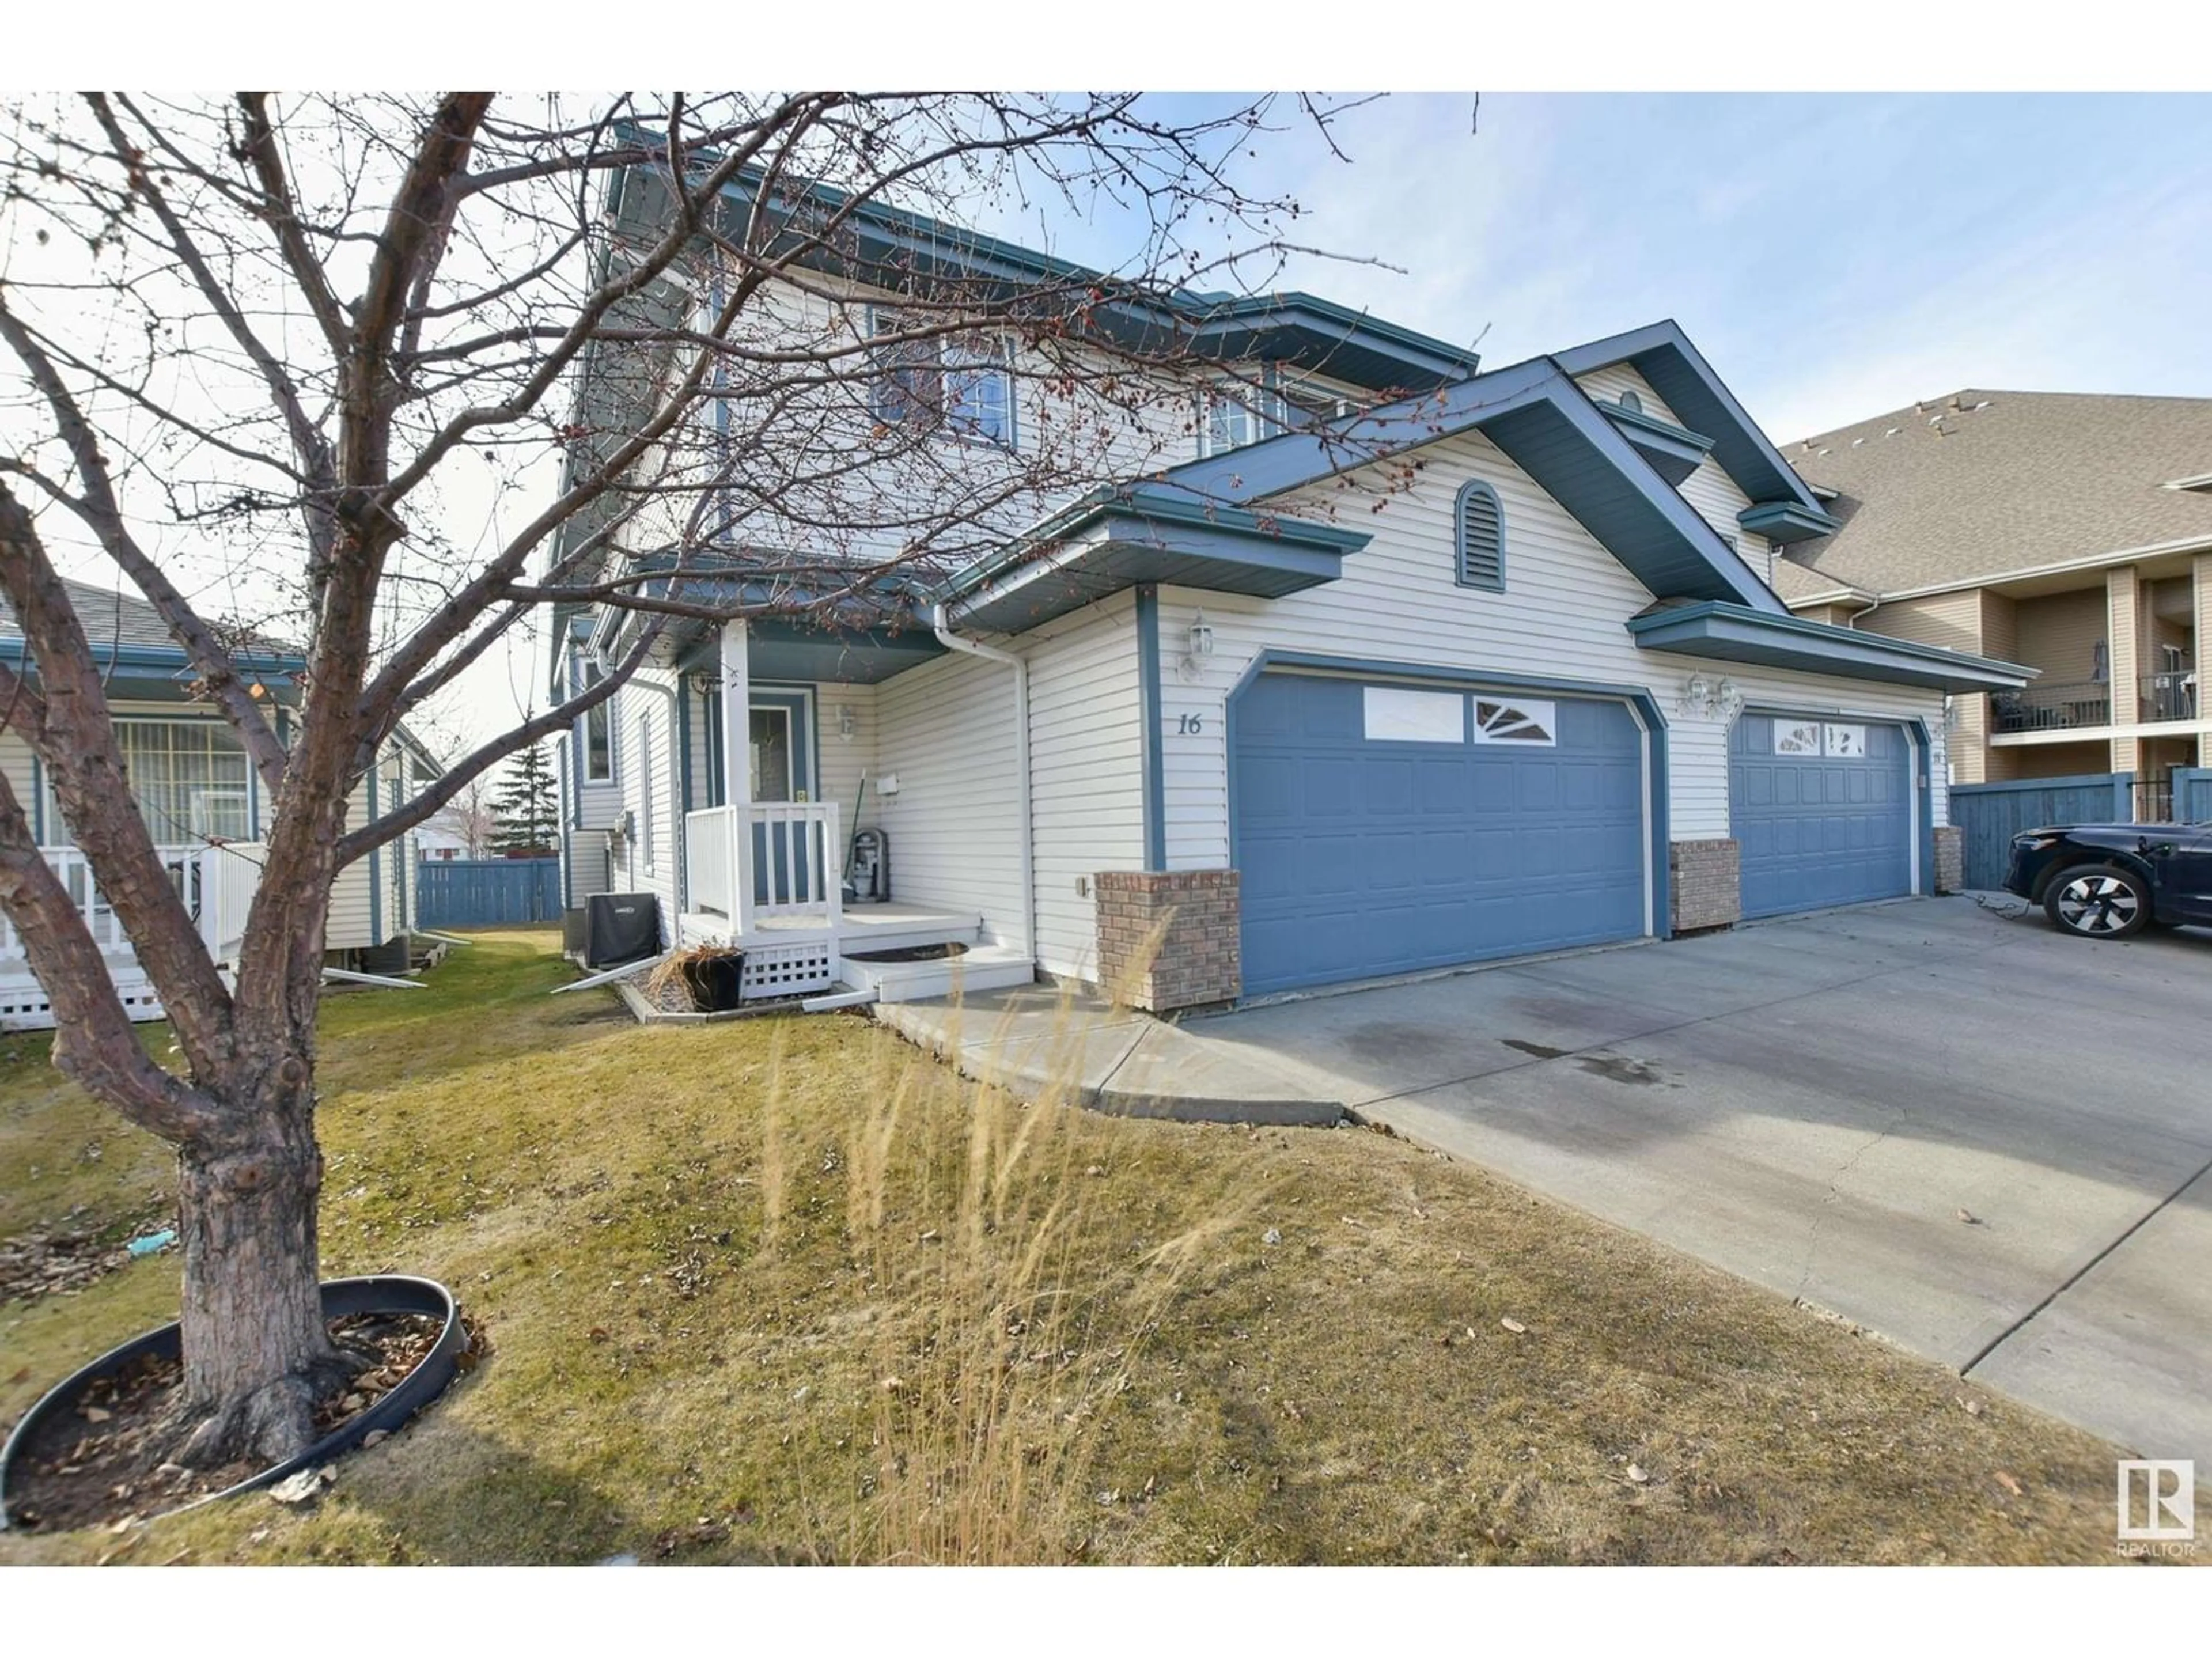 A pic from exterior of the house or condo for #16 17418 98A AV NW, Edmonton Alberta T5T6G2